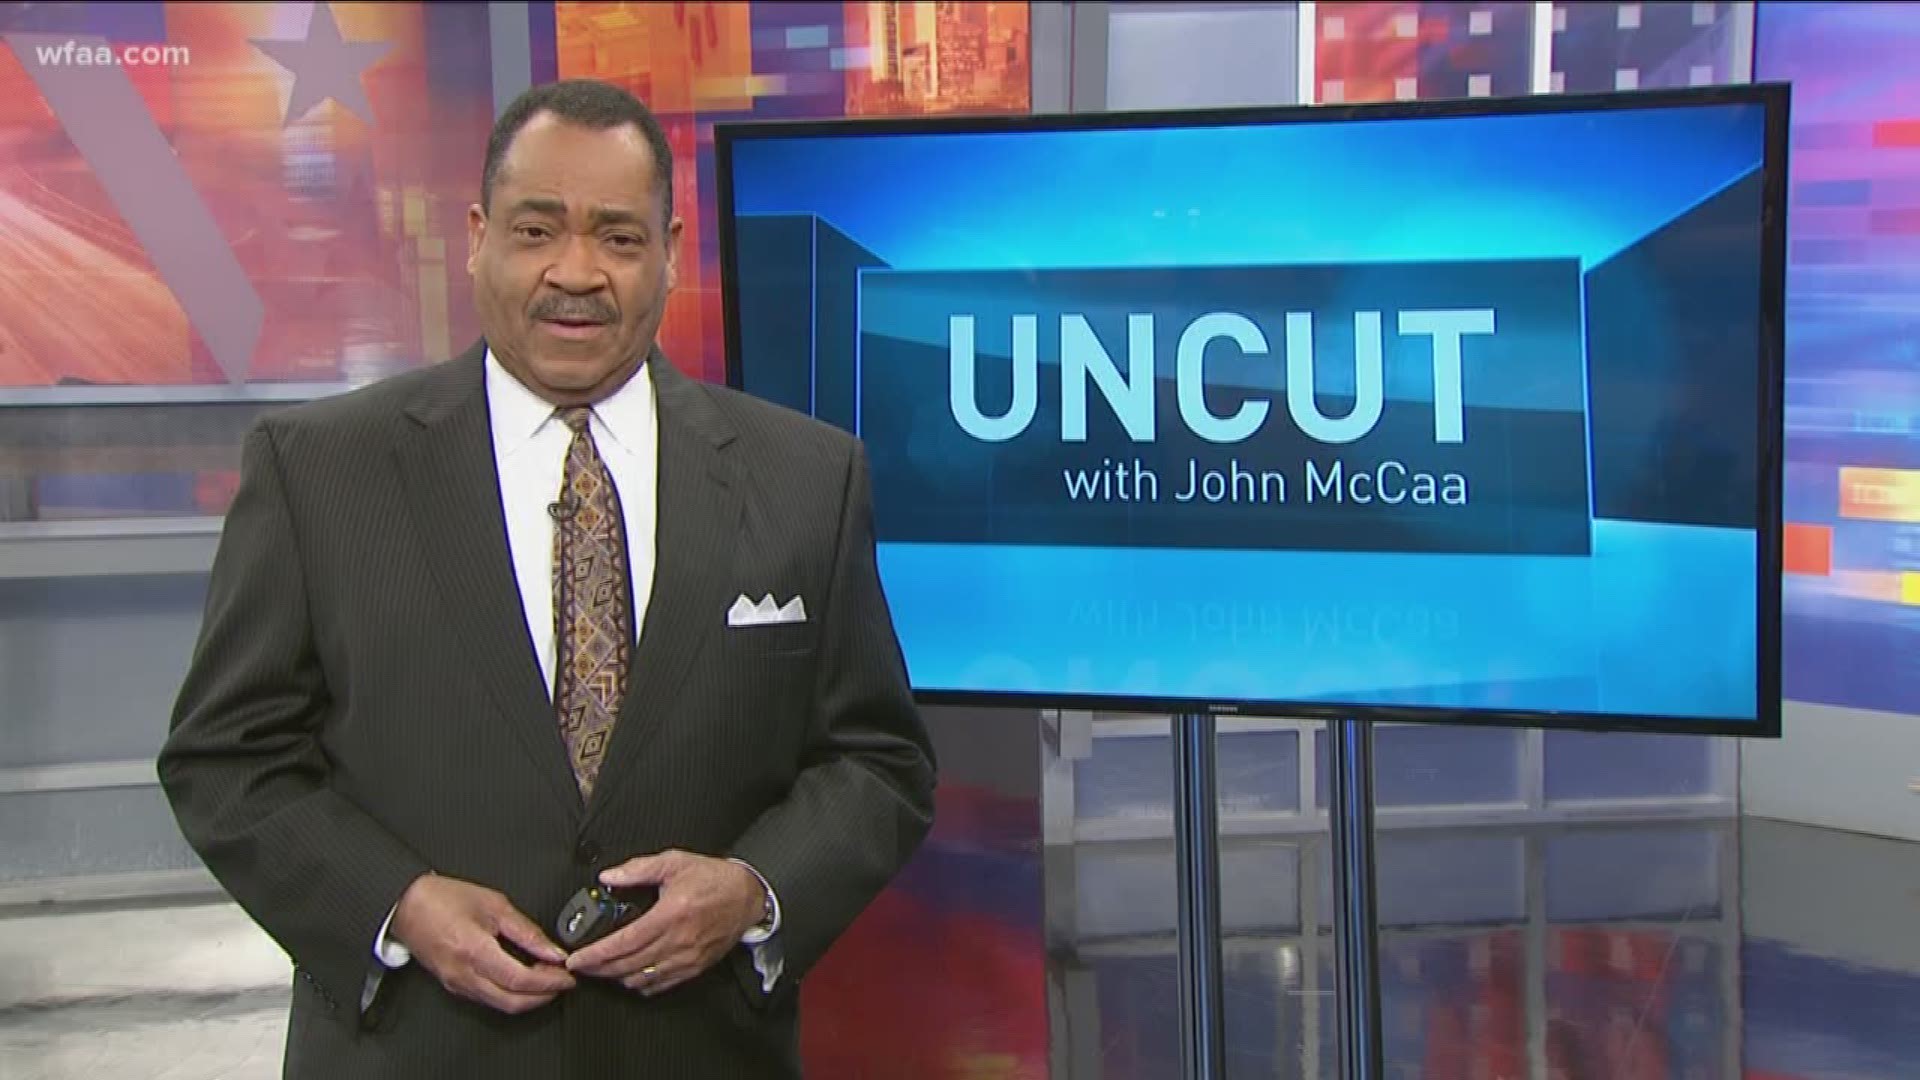 Uncut: Gifts of the Season